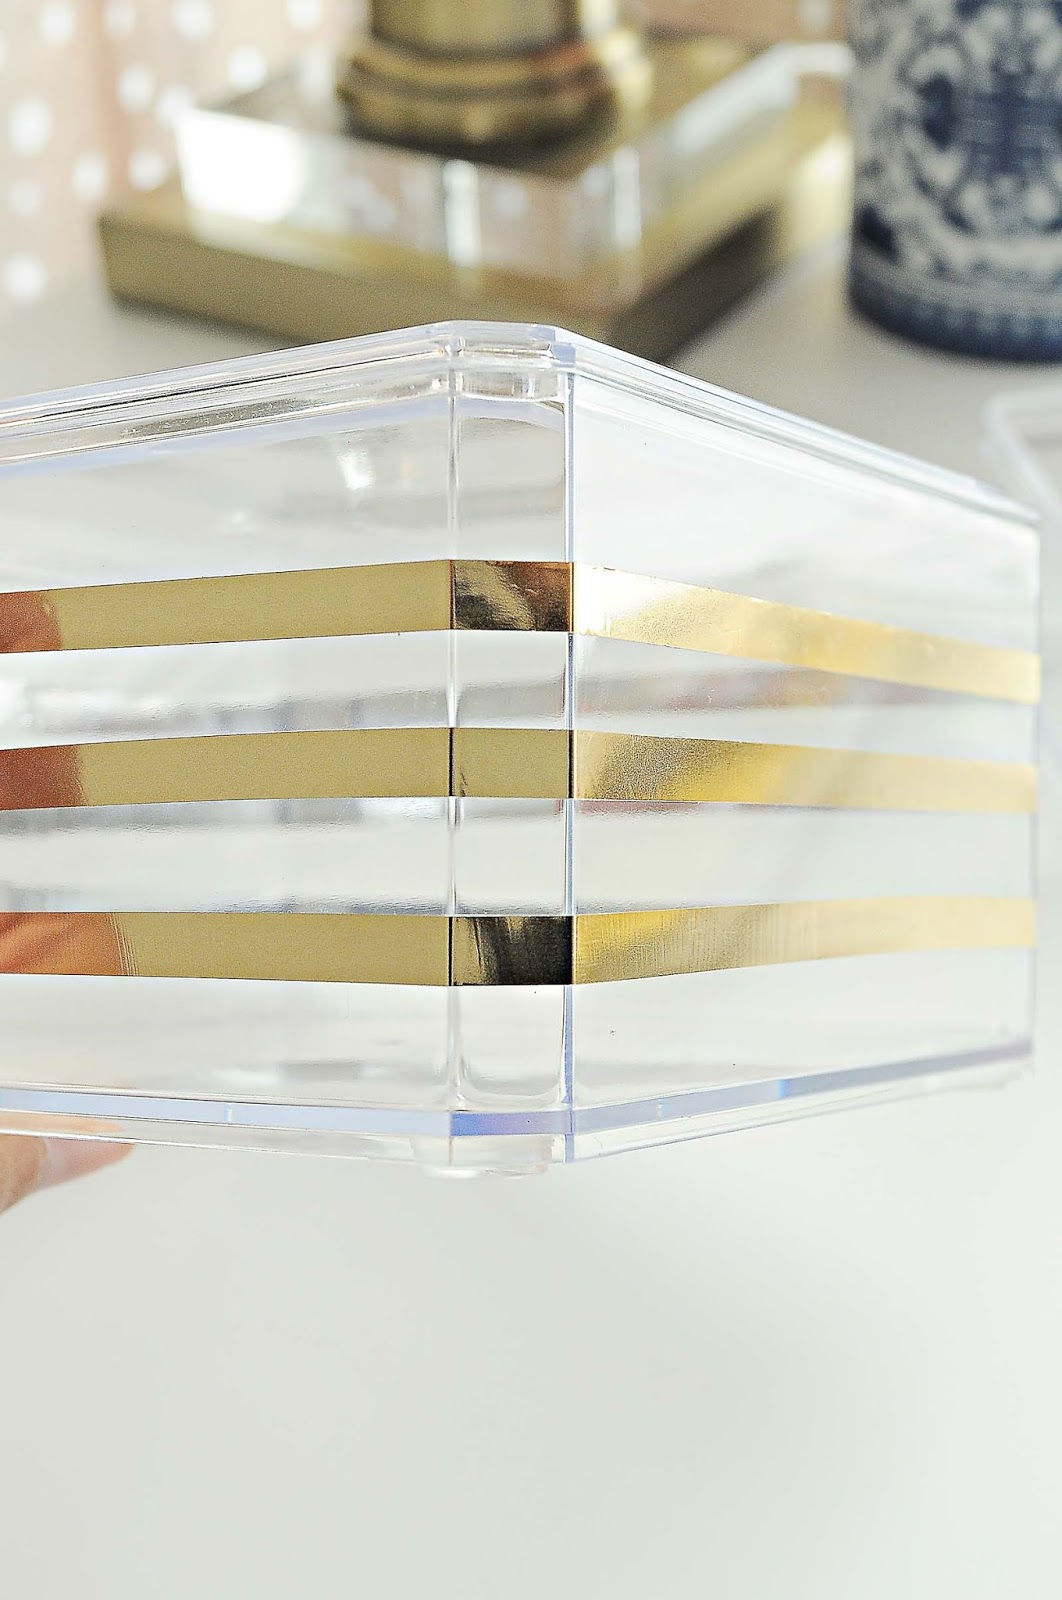 DIY gold and lucite dollar store storage organizer- great for makeup and beauty supplies.